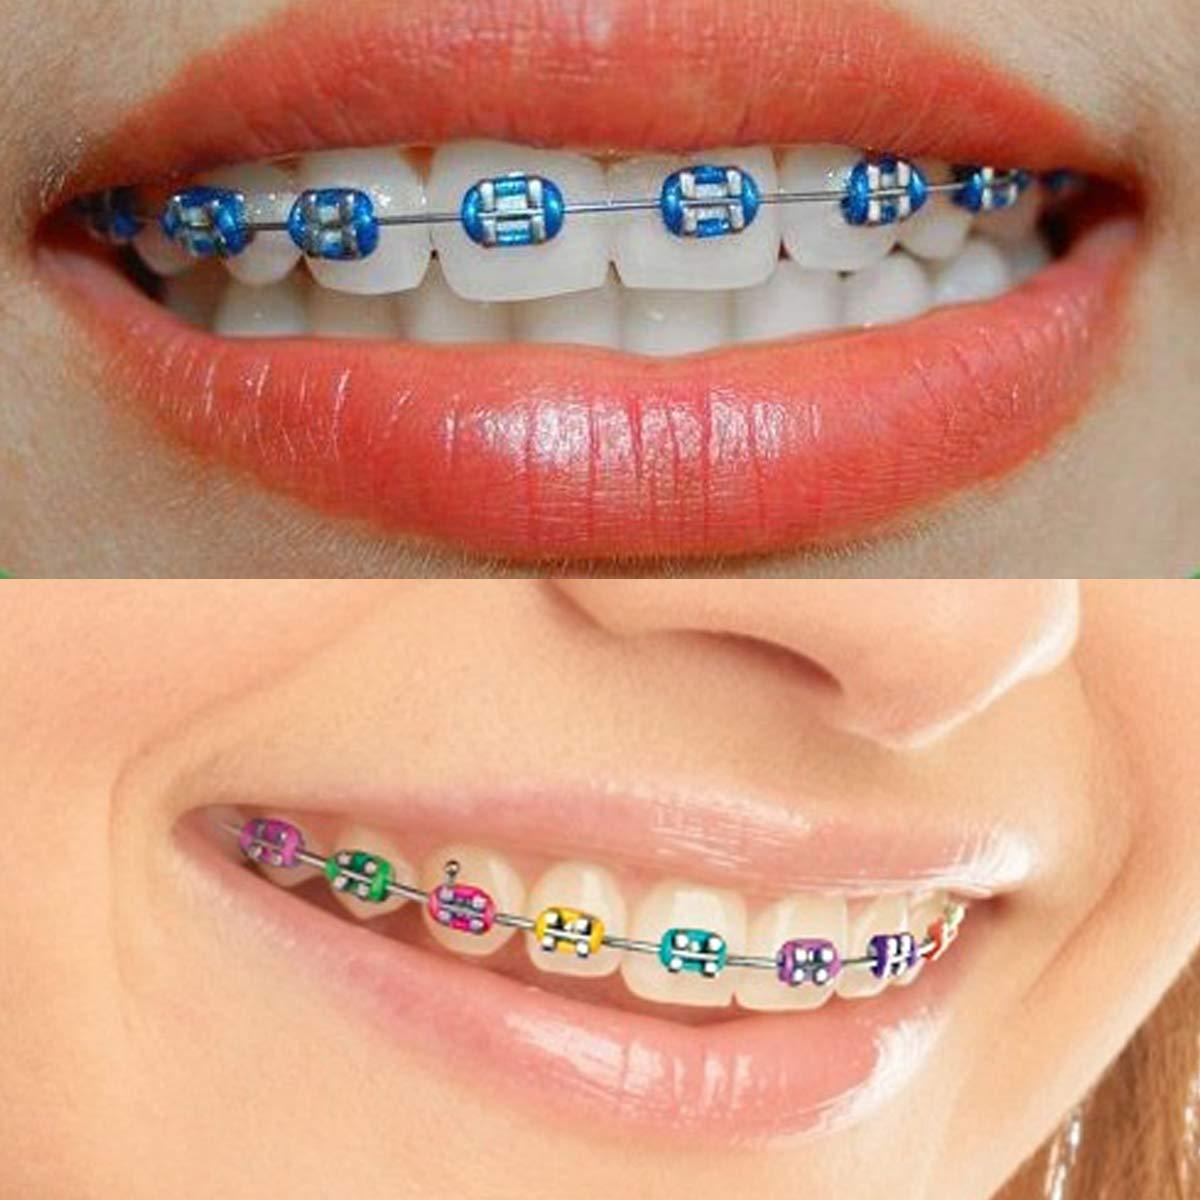 1040 Pcs Multicolored Braces Rubber Bands Orthodontic Ligature Ties O-Rings  Elastic Bands for Braces (Color)